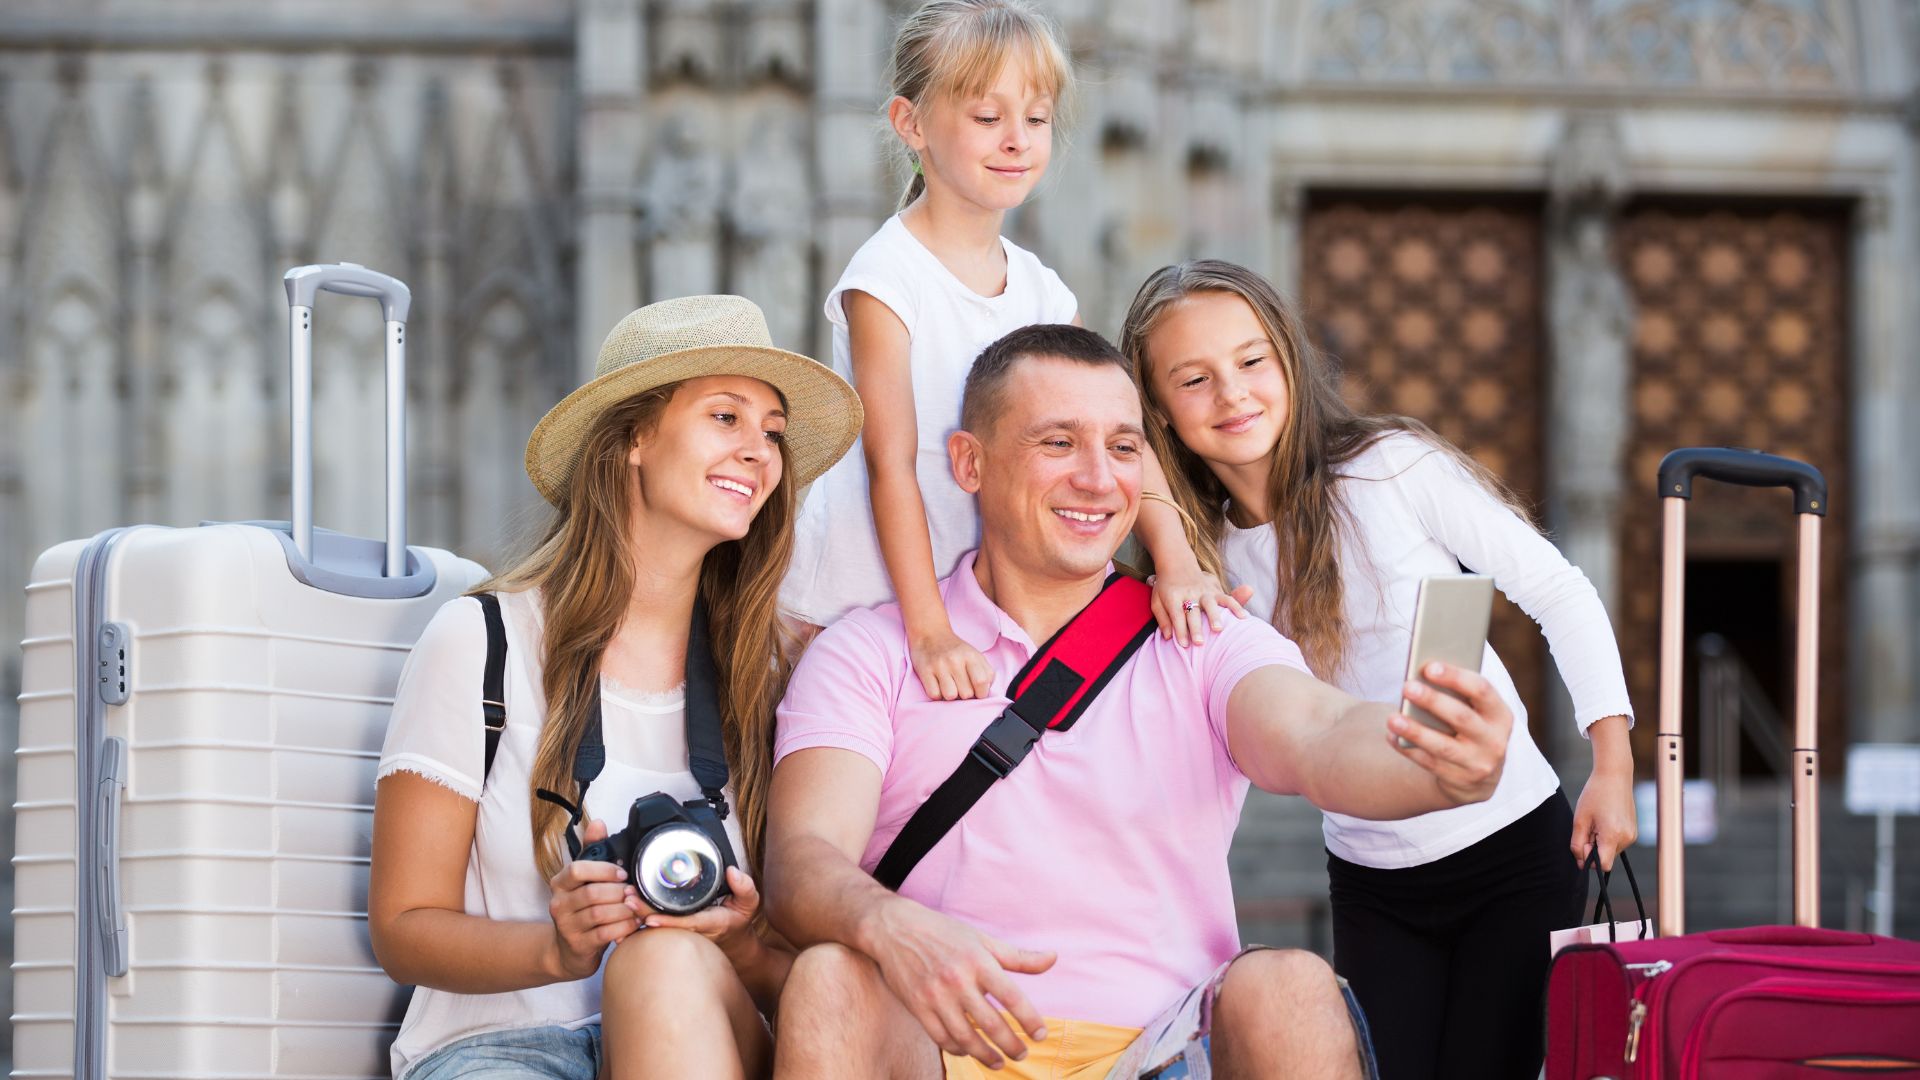 <p>Traveling with your family can be a great adventure, but packing can be a bit of a challenge. When you travel with your partner and children, it’s easy to overpack. To ensure you have everything you need and avoid unnecessary stress, it’s important to pack smart and keep a list. Here are 15 essential items you should pack to ensure a fun and stress-free family trip.</p>